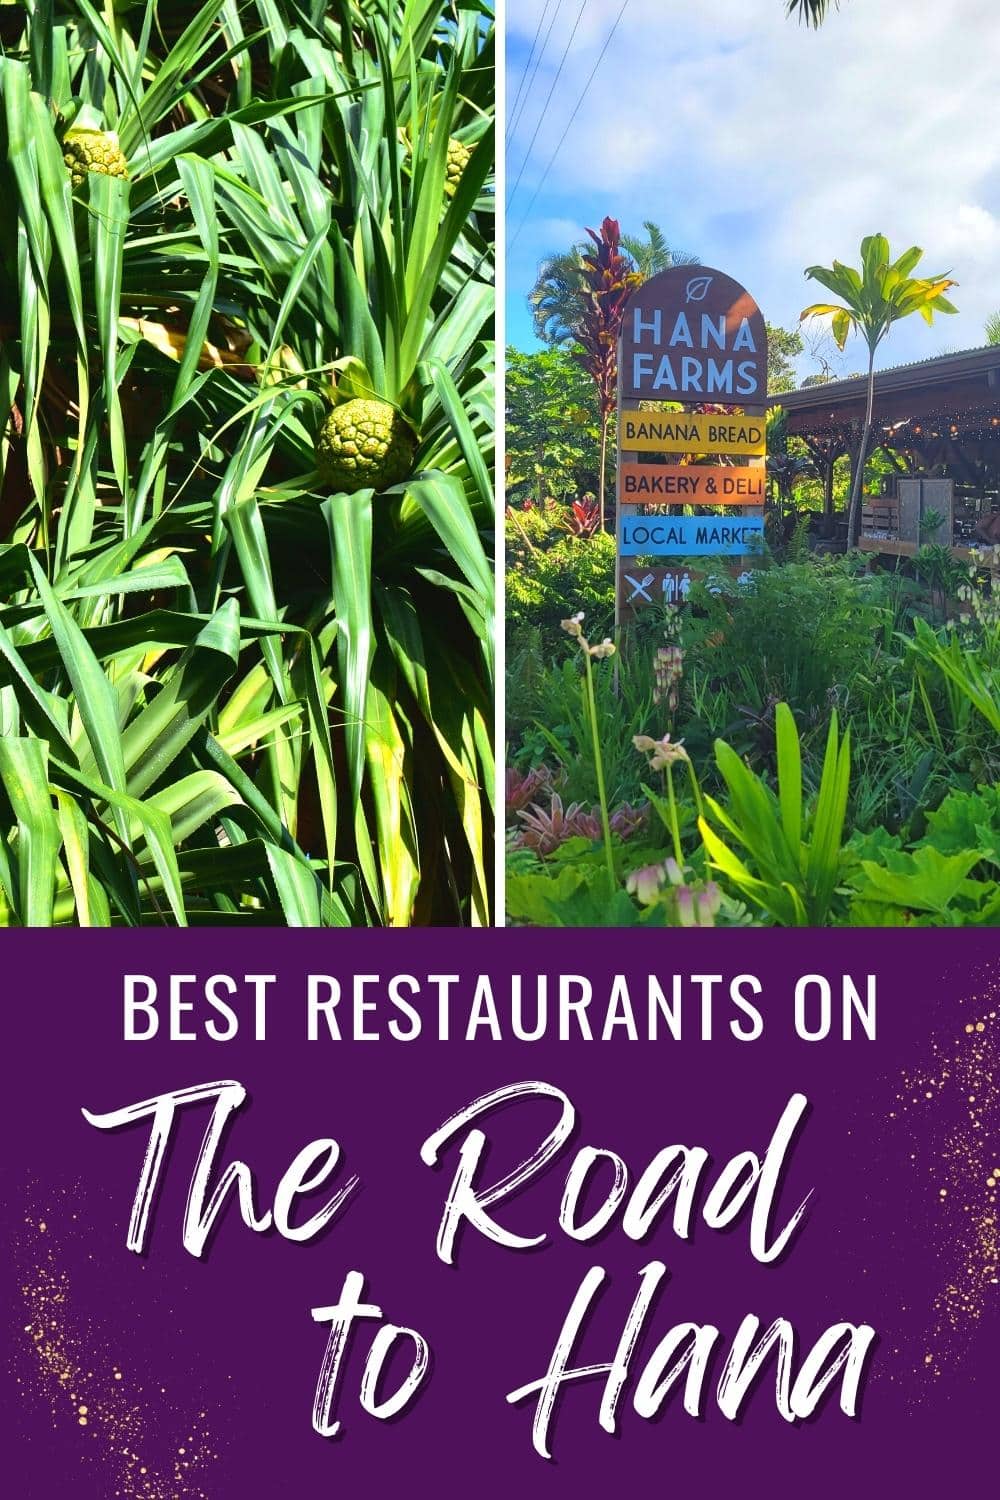 Where to Find the Best Restaurants on the Road to Hana